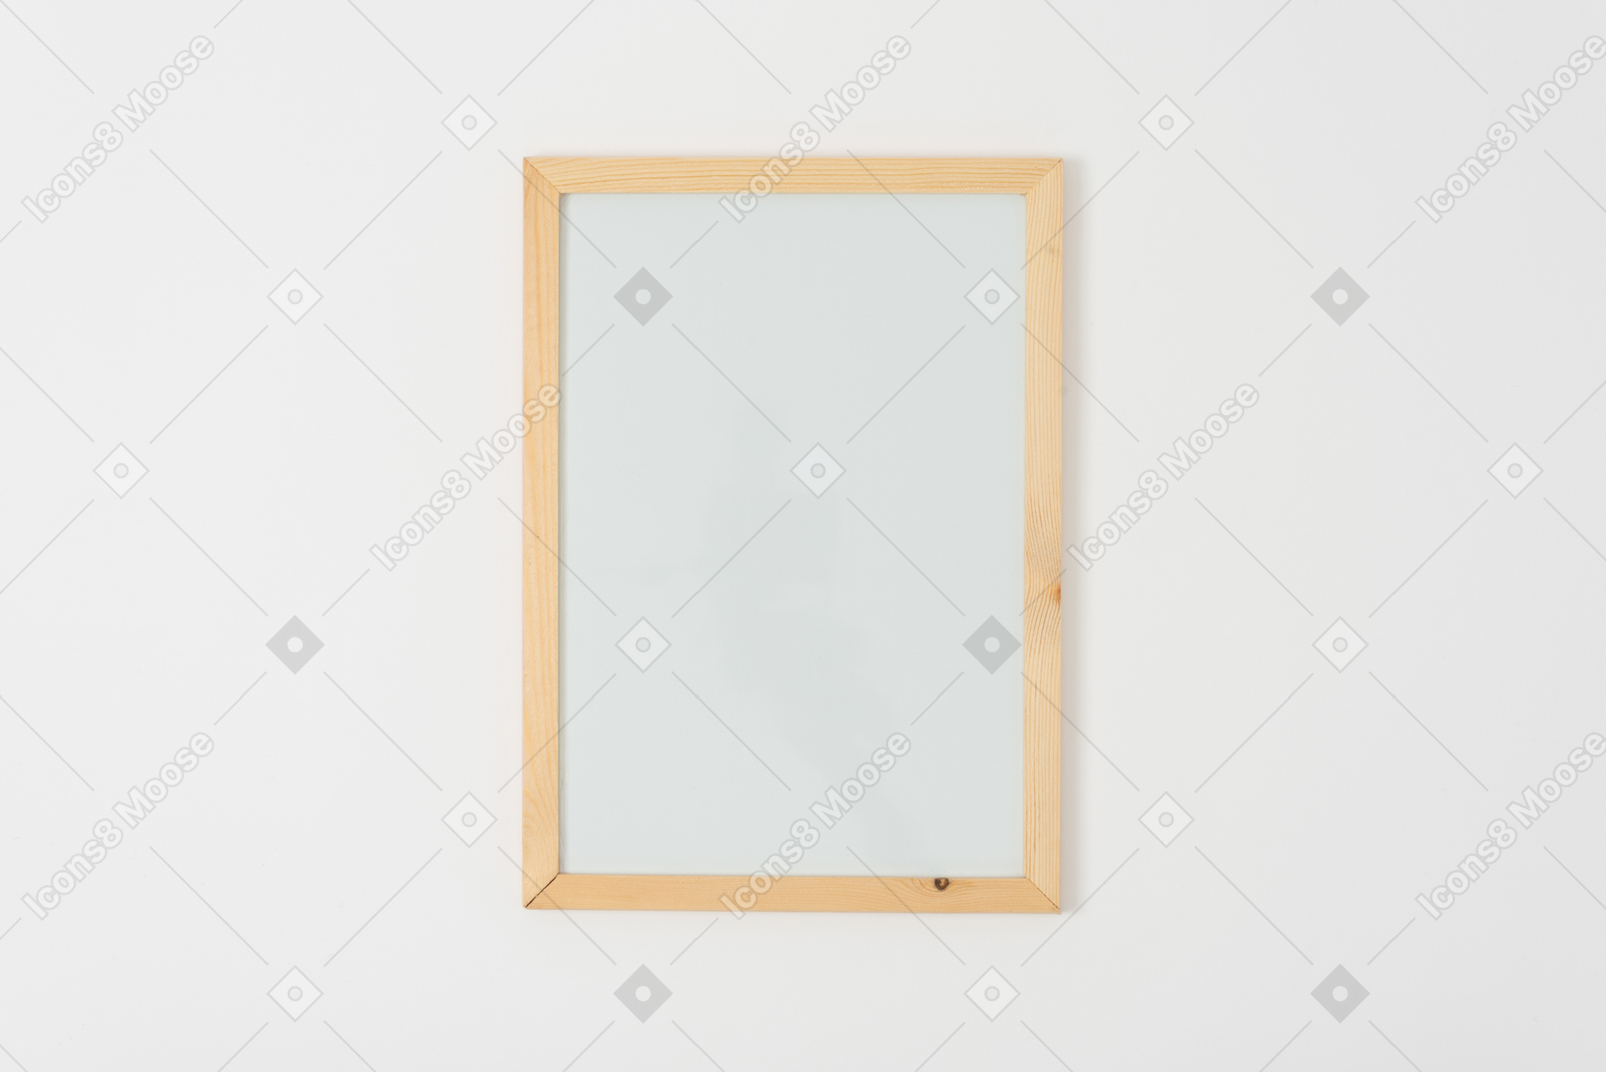 Frame a photo of a loved one